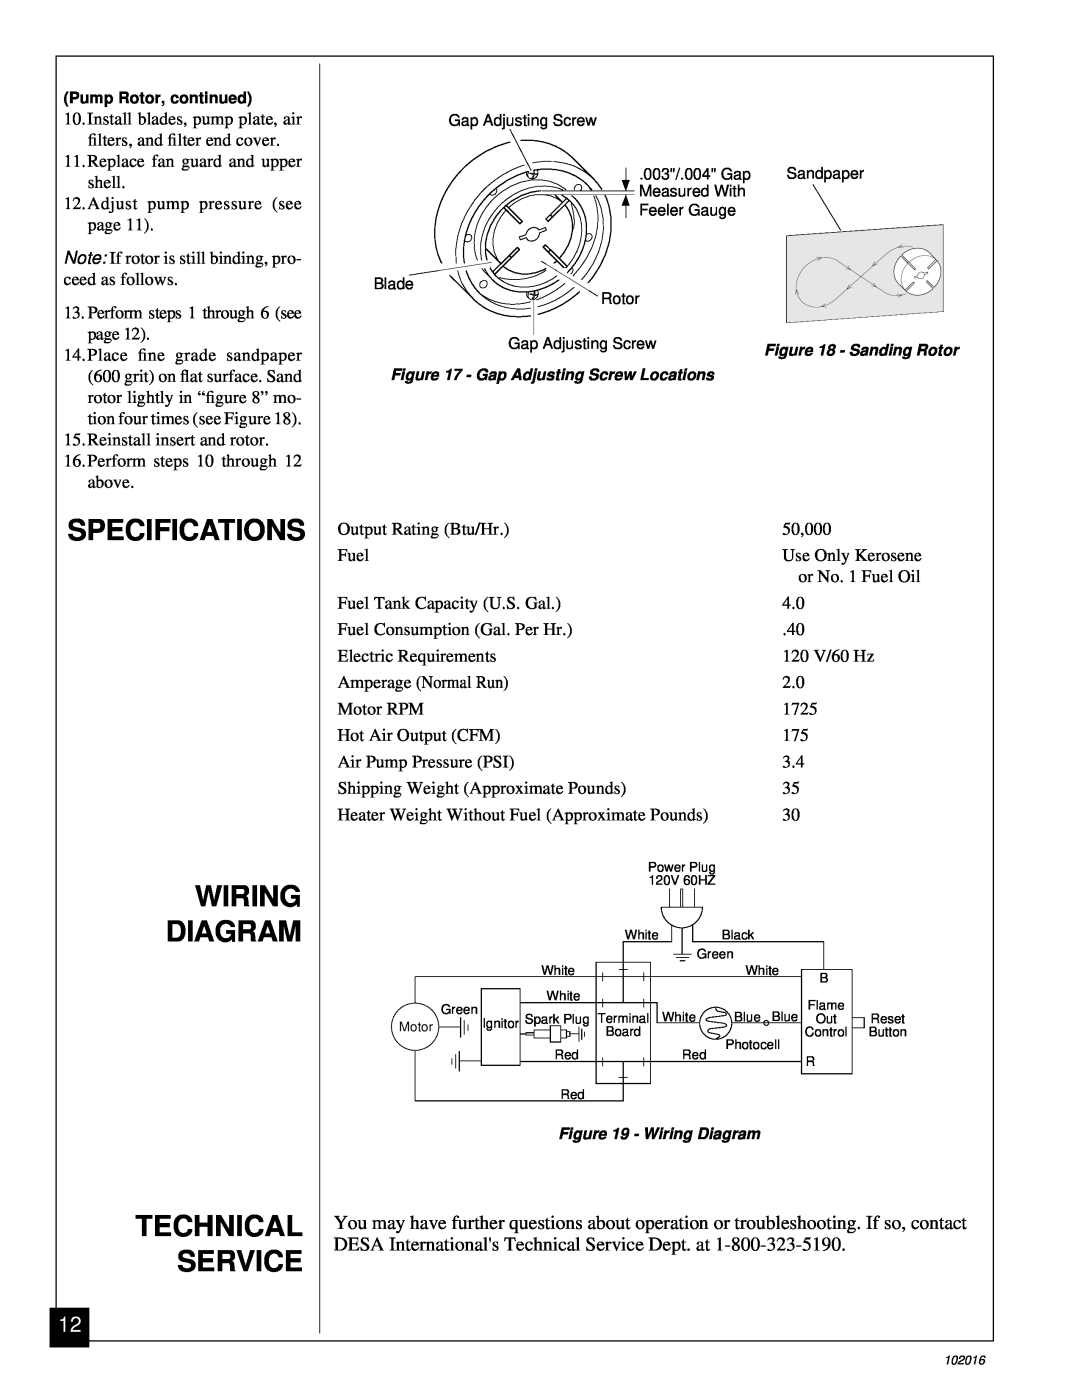 Desa REM50B, B50G owner manual Specifications Wiring Diagram Technical Service 